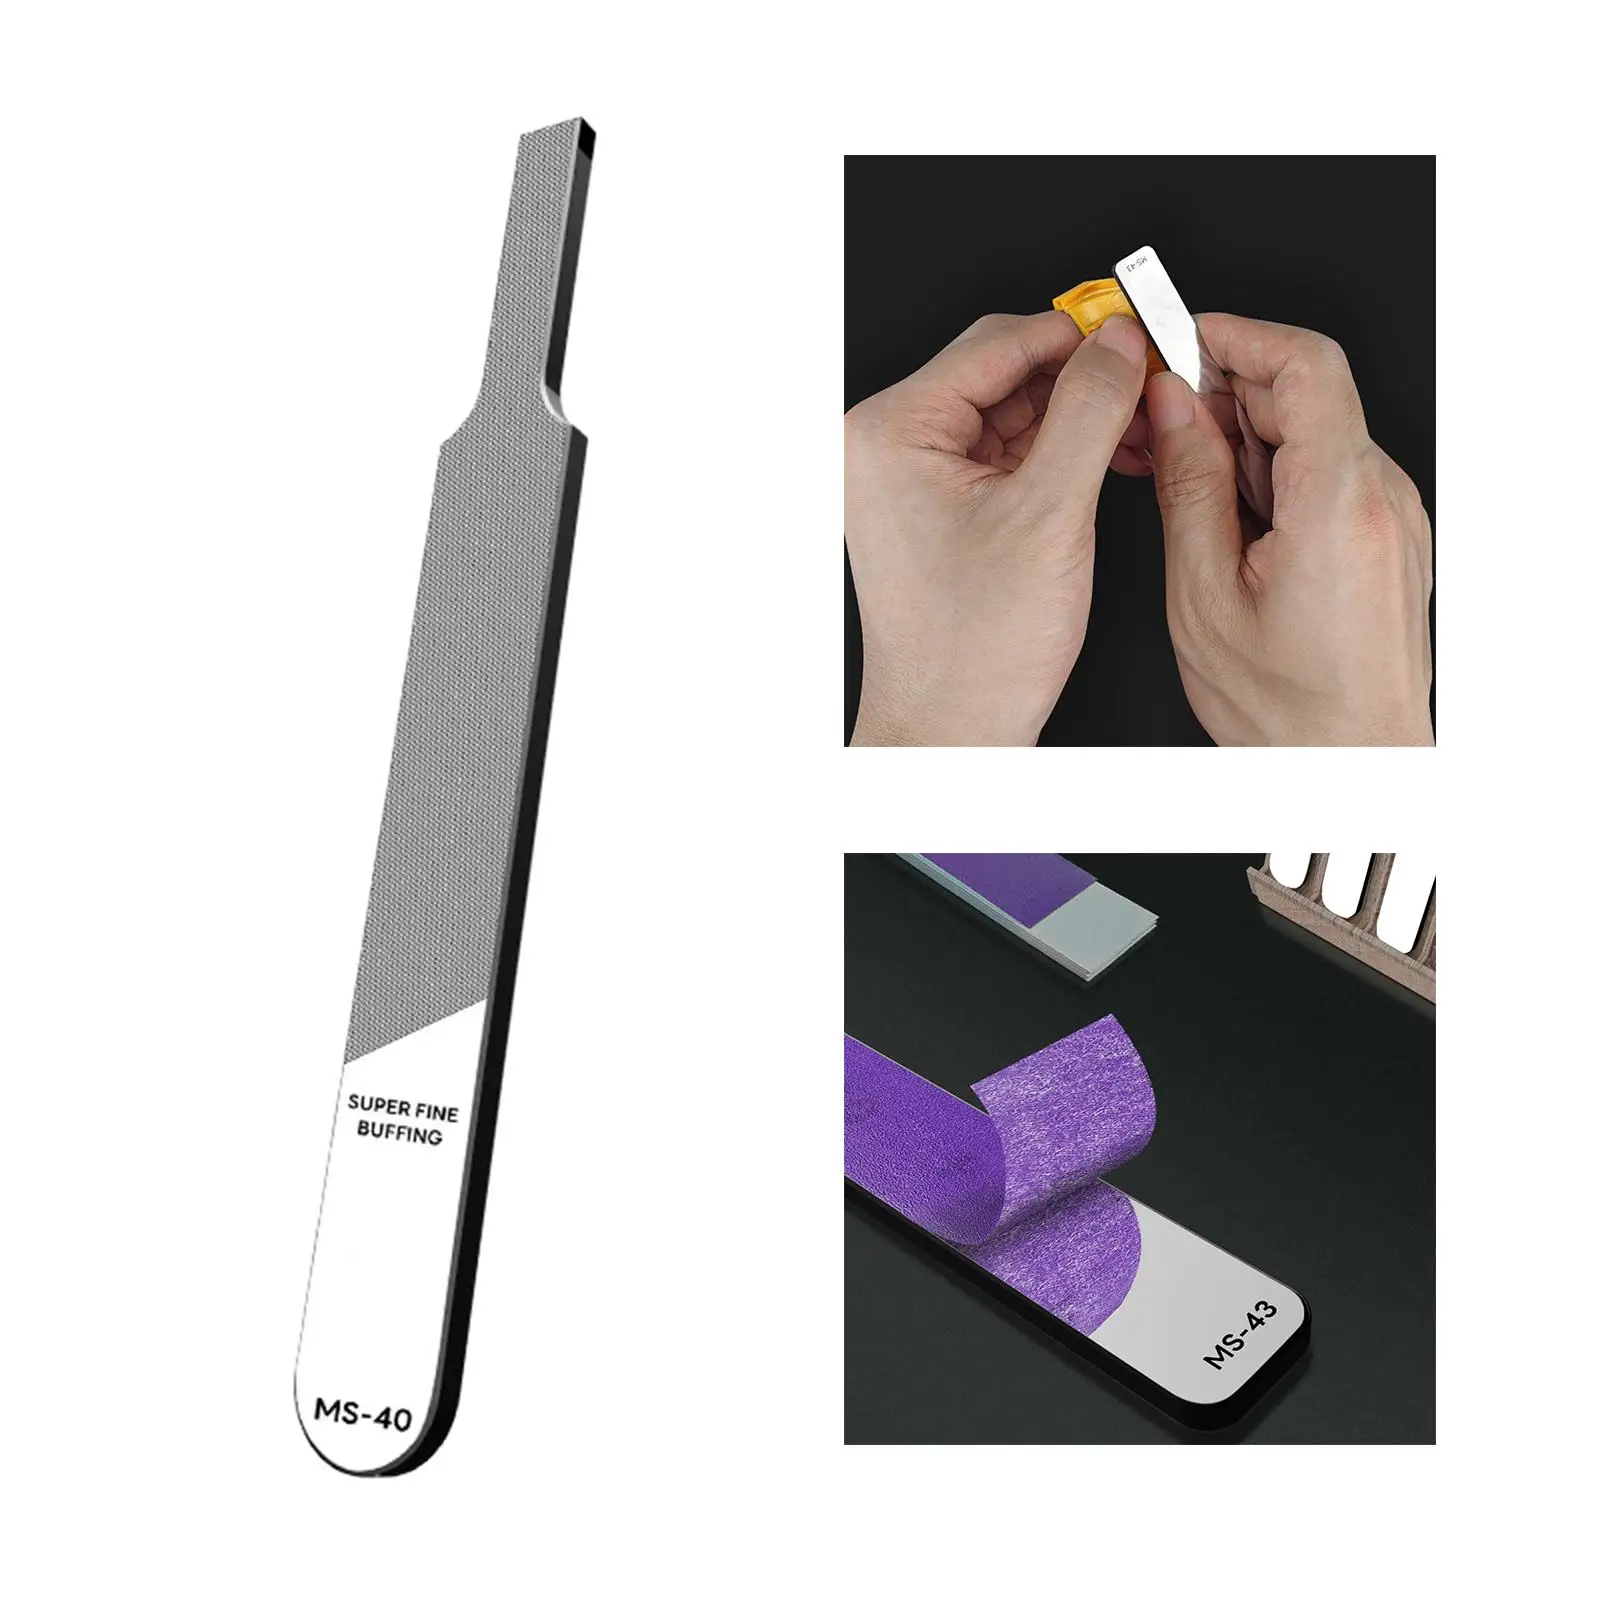 Glass Polishing File Engraving Hand Tools Precision Hobby Grinding Tool for Model Plane Car Toy Resin Material Figure Miniature